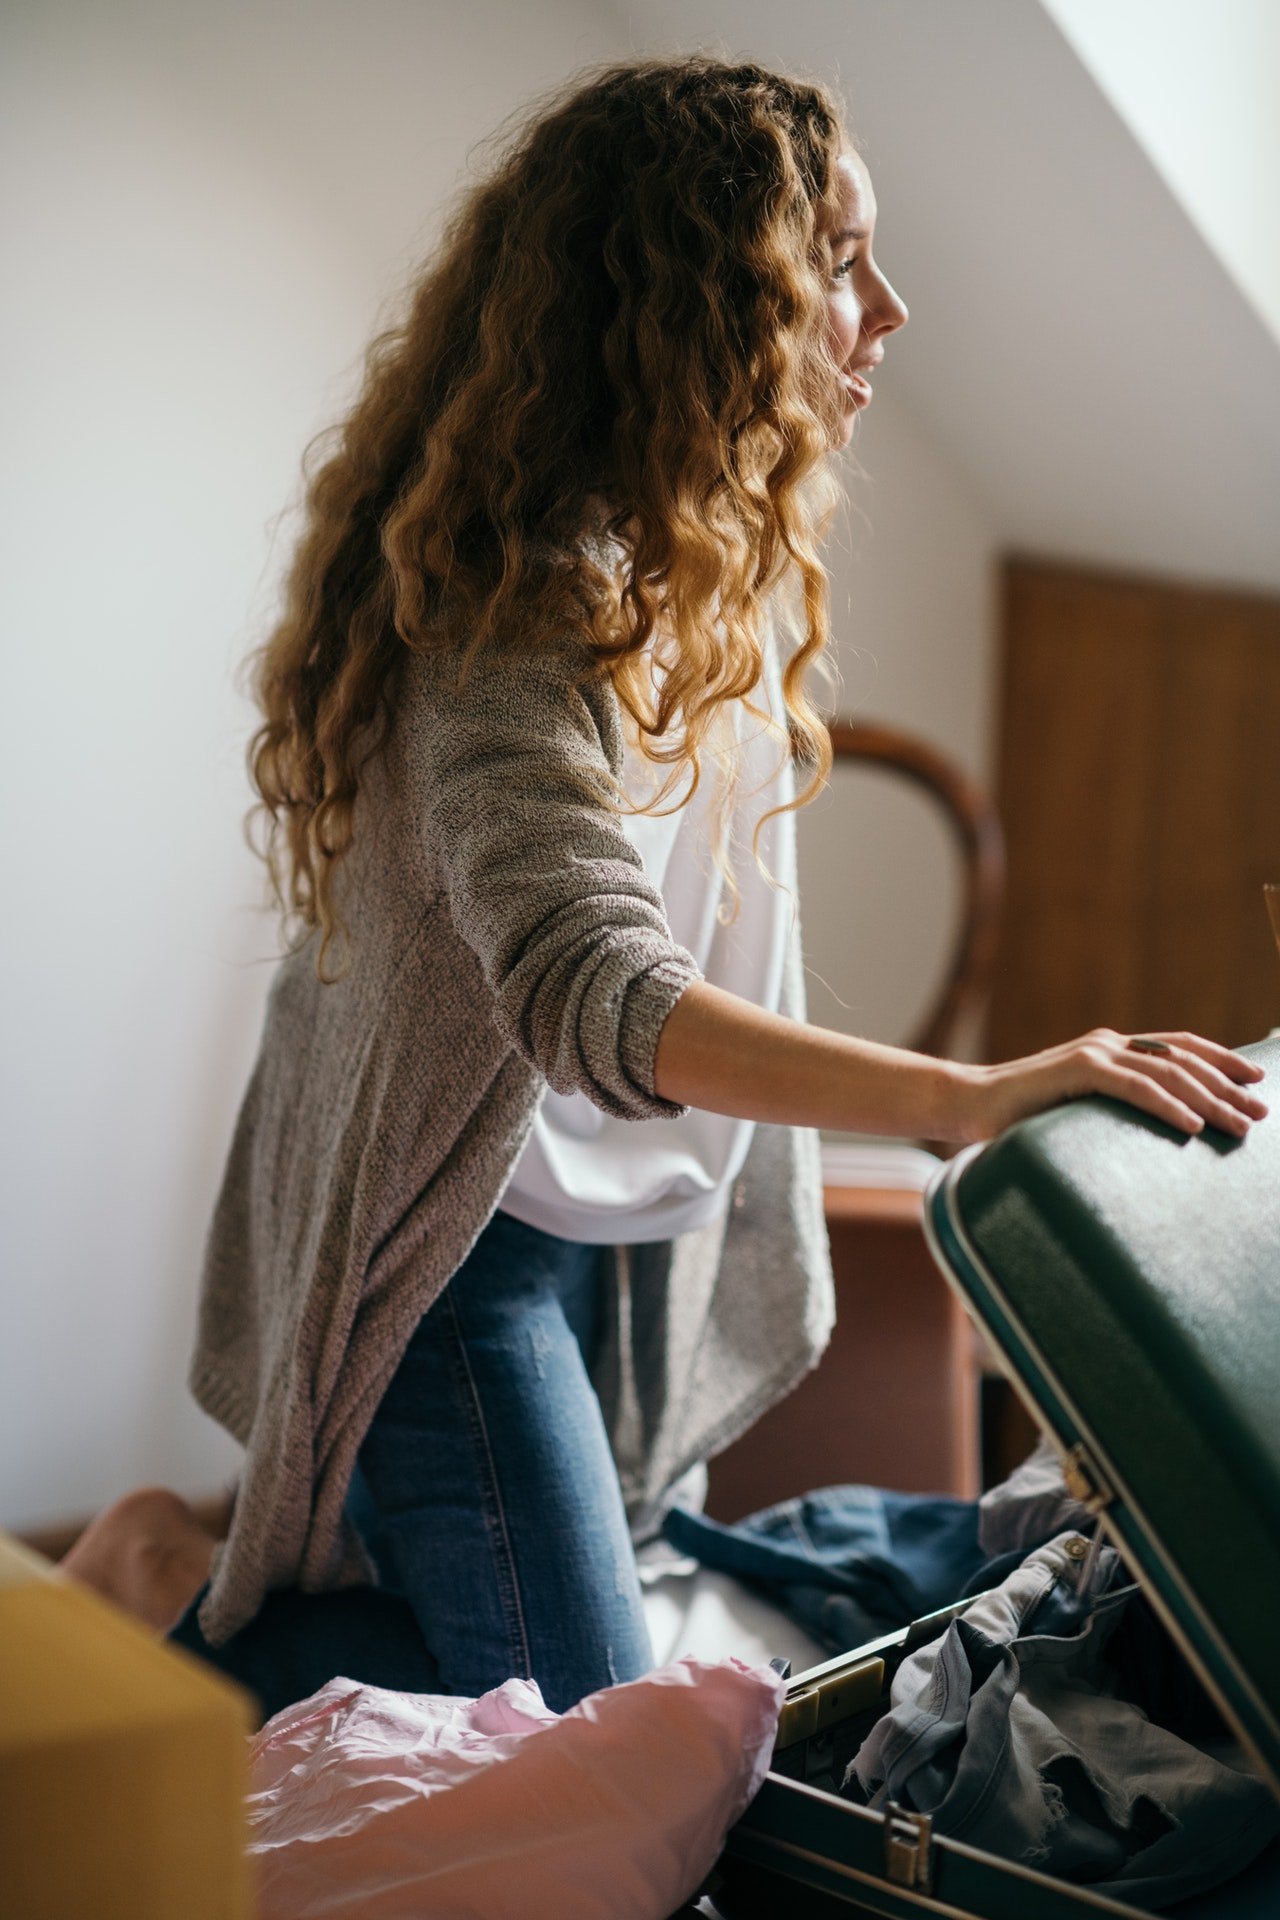 Molly packed her bags and left. | Source: Pexels